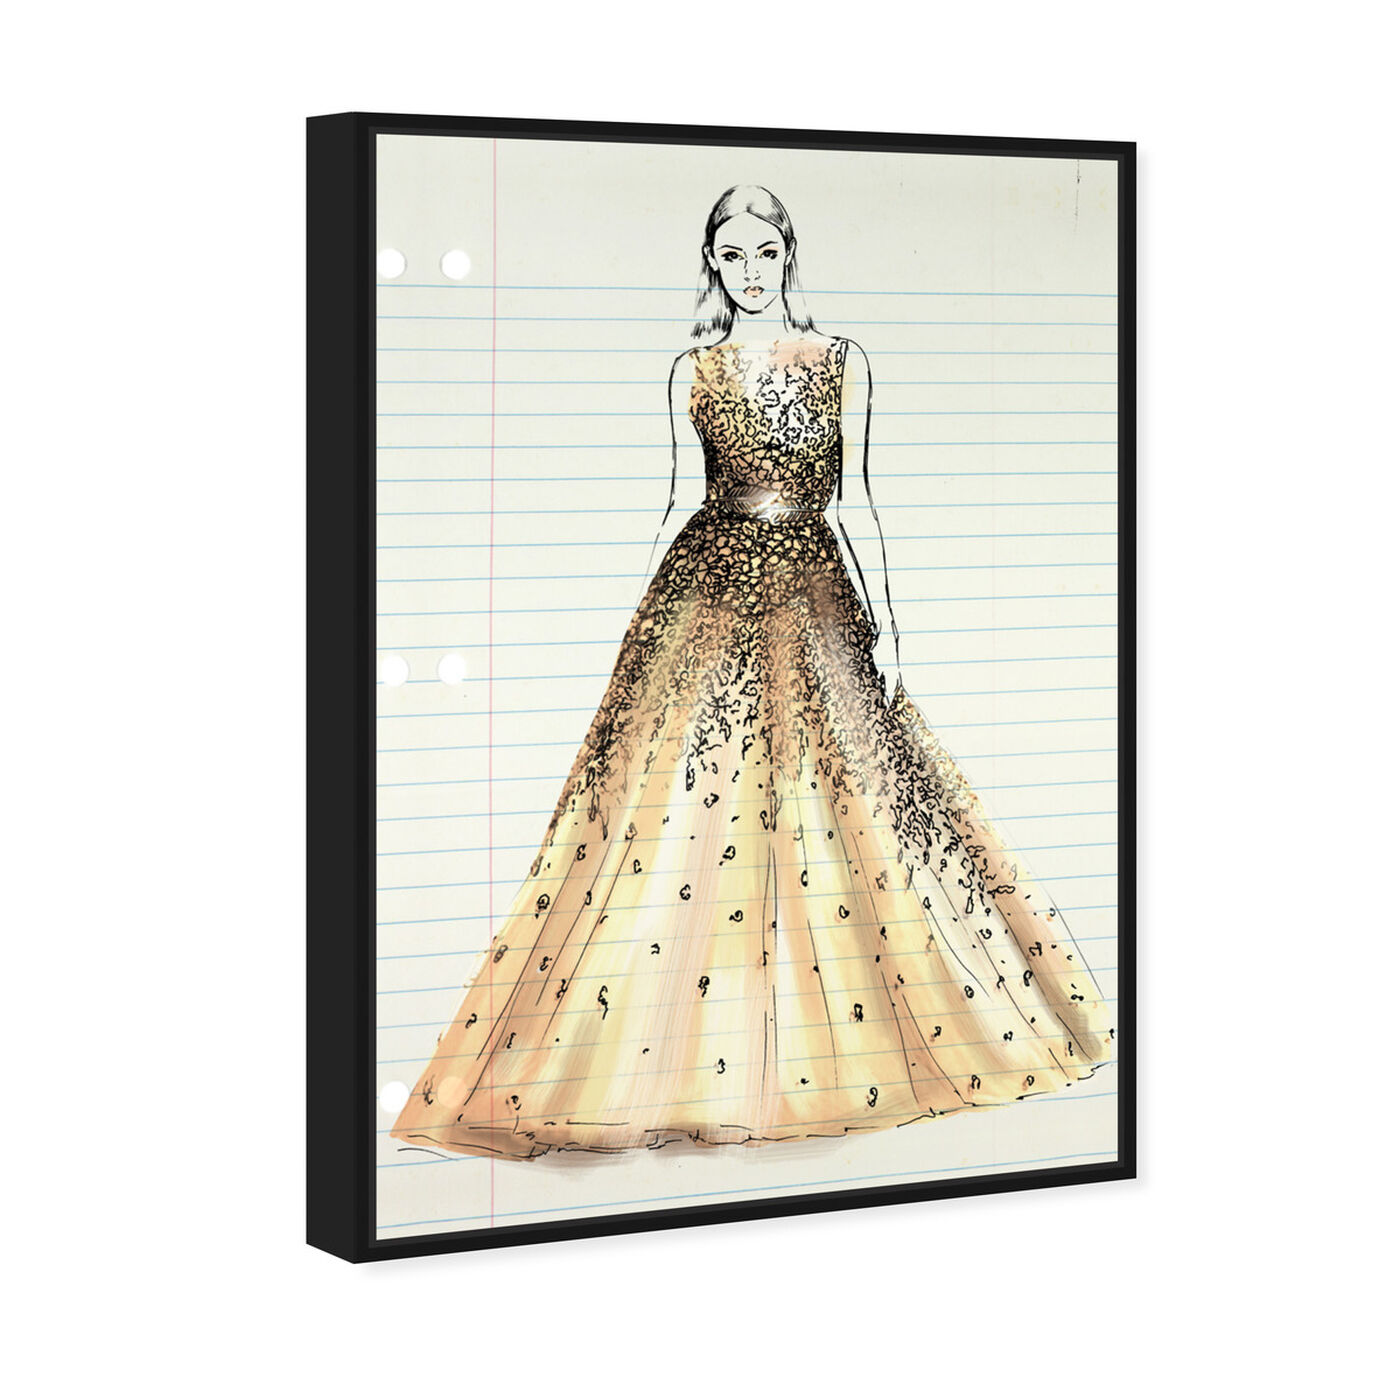 Angled view of Fashion Illustration 3 featuring fashion and glam and dress art.